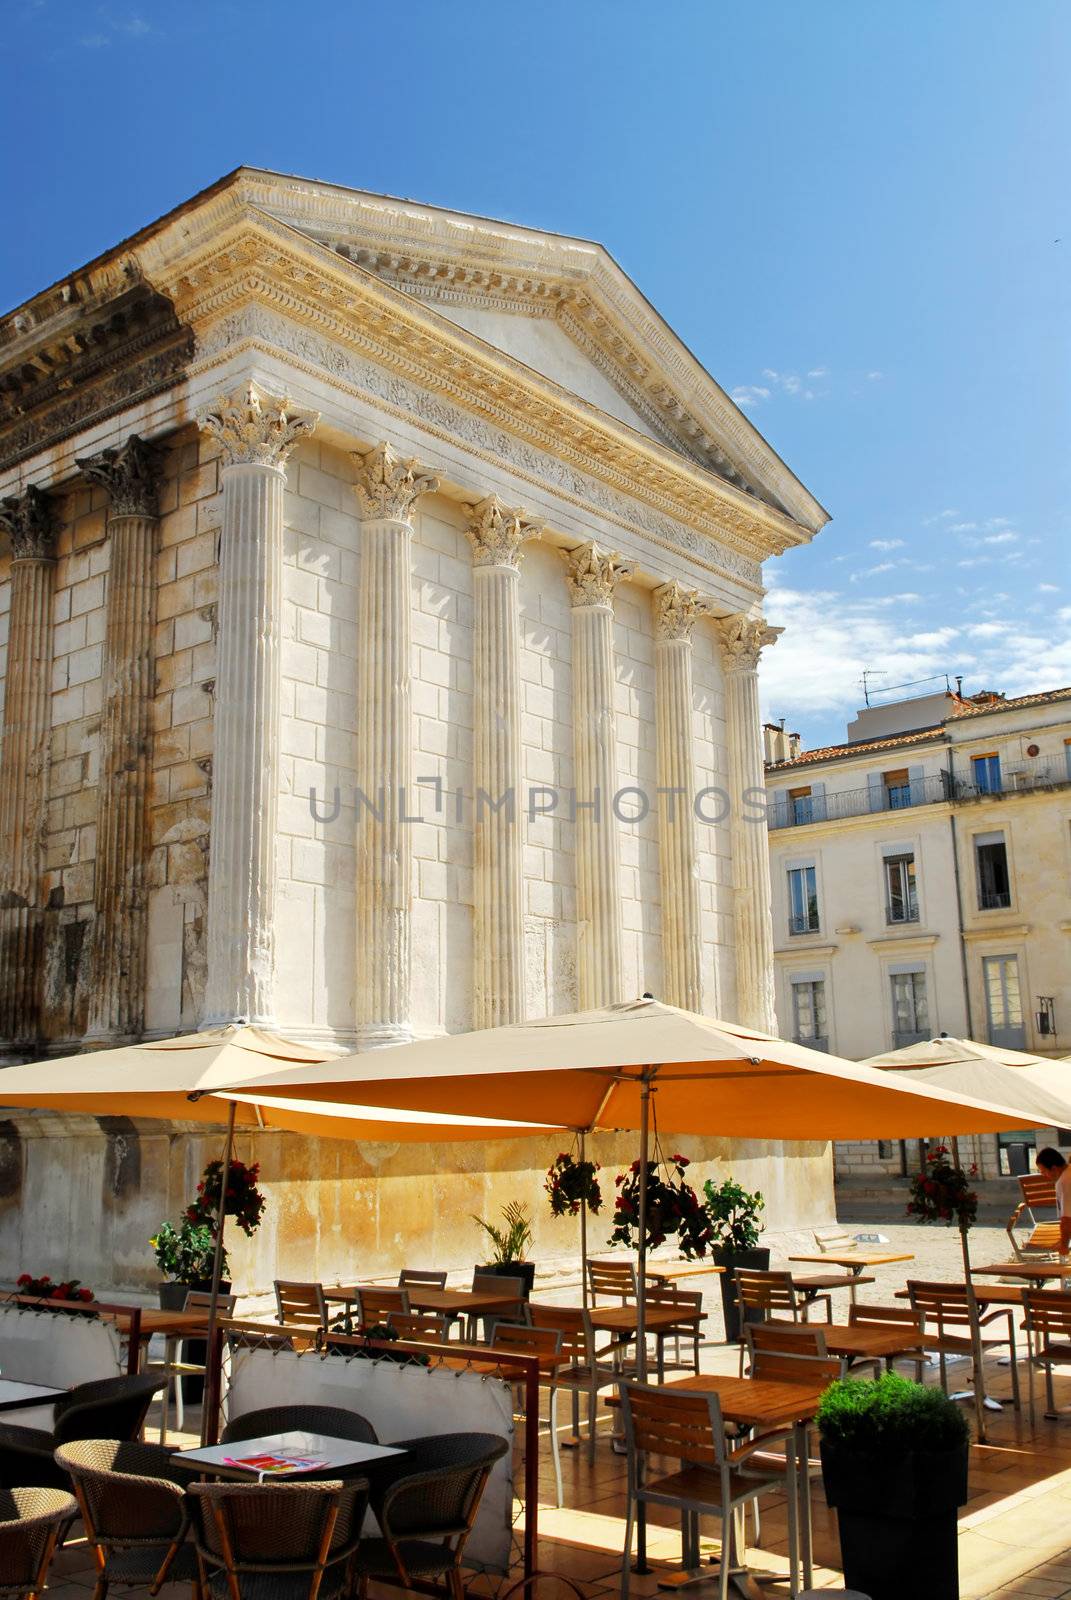 Roman temple Maison Carree and outdoor cafe in city of Nimes in southern France